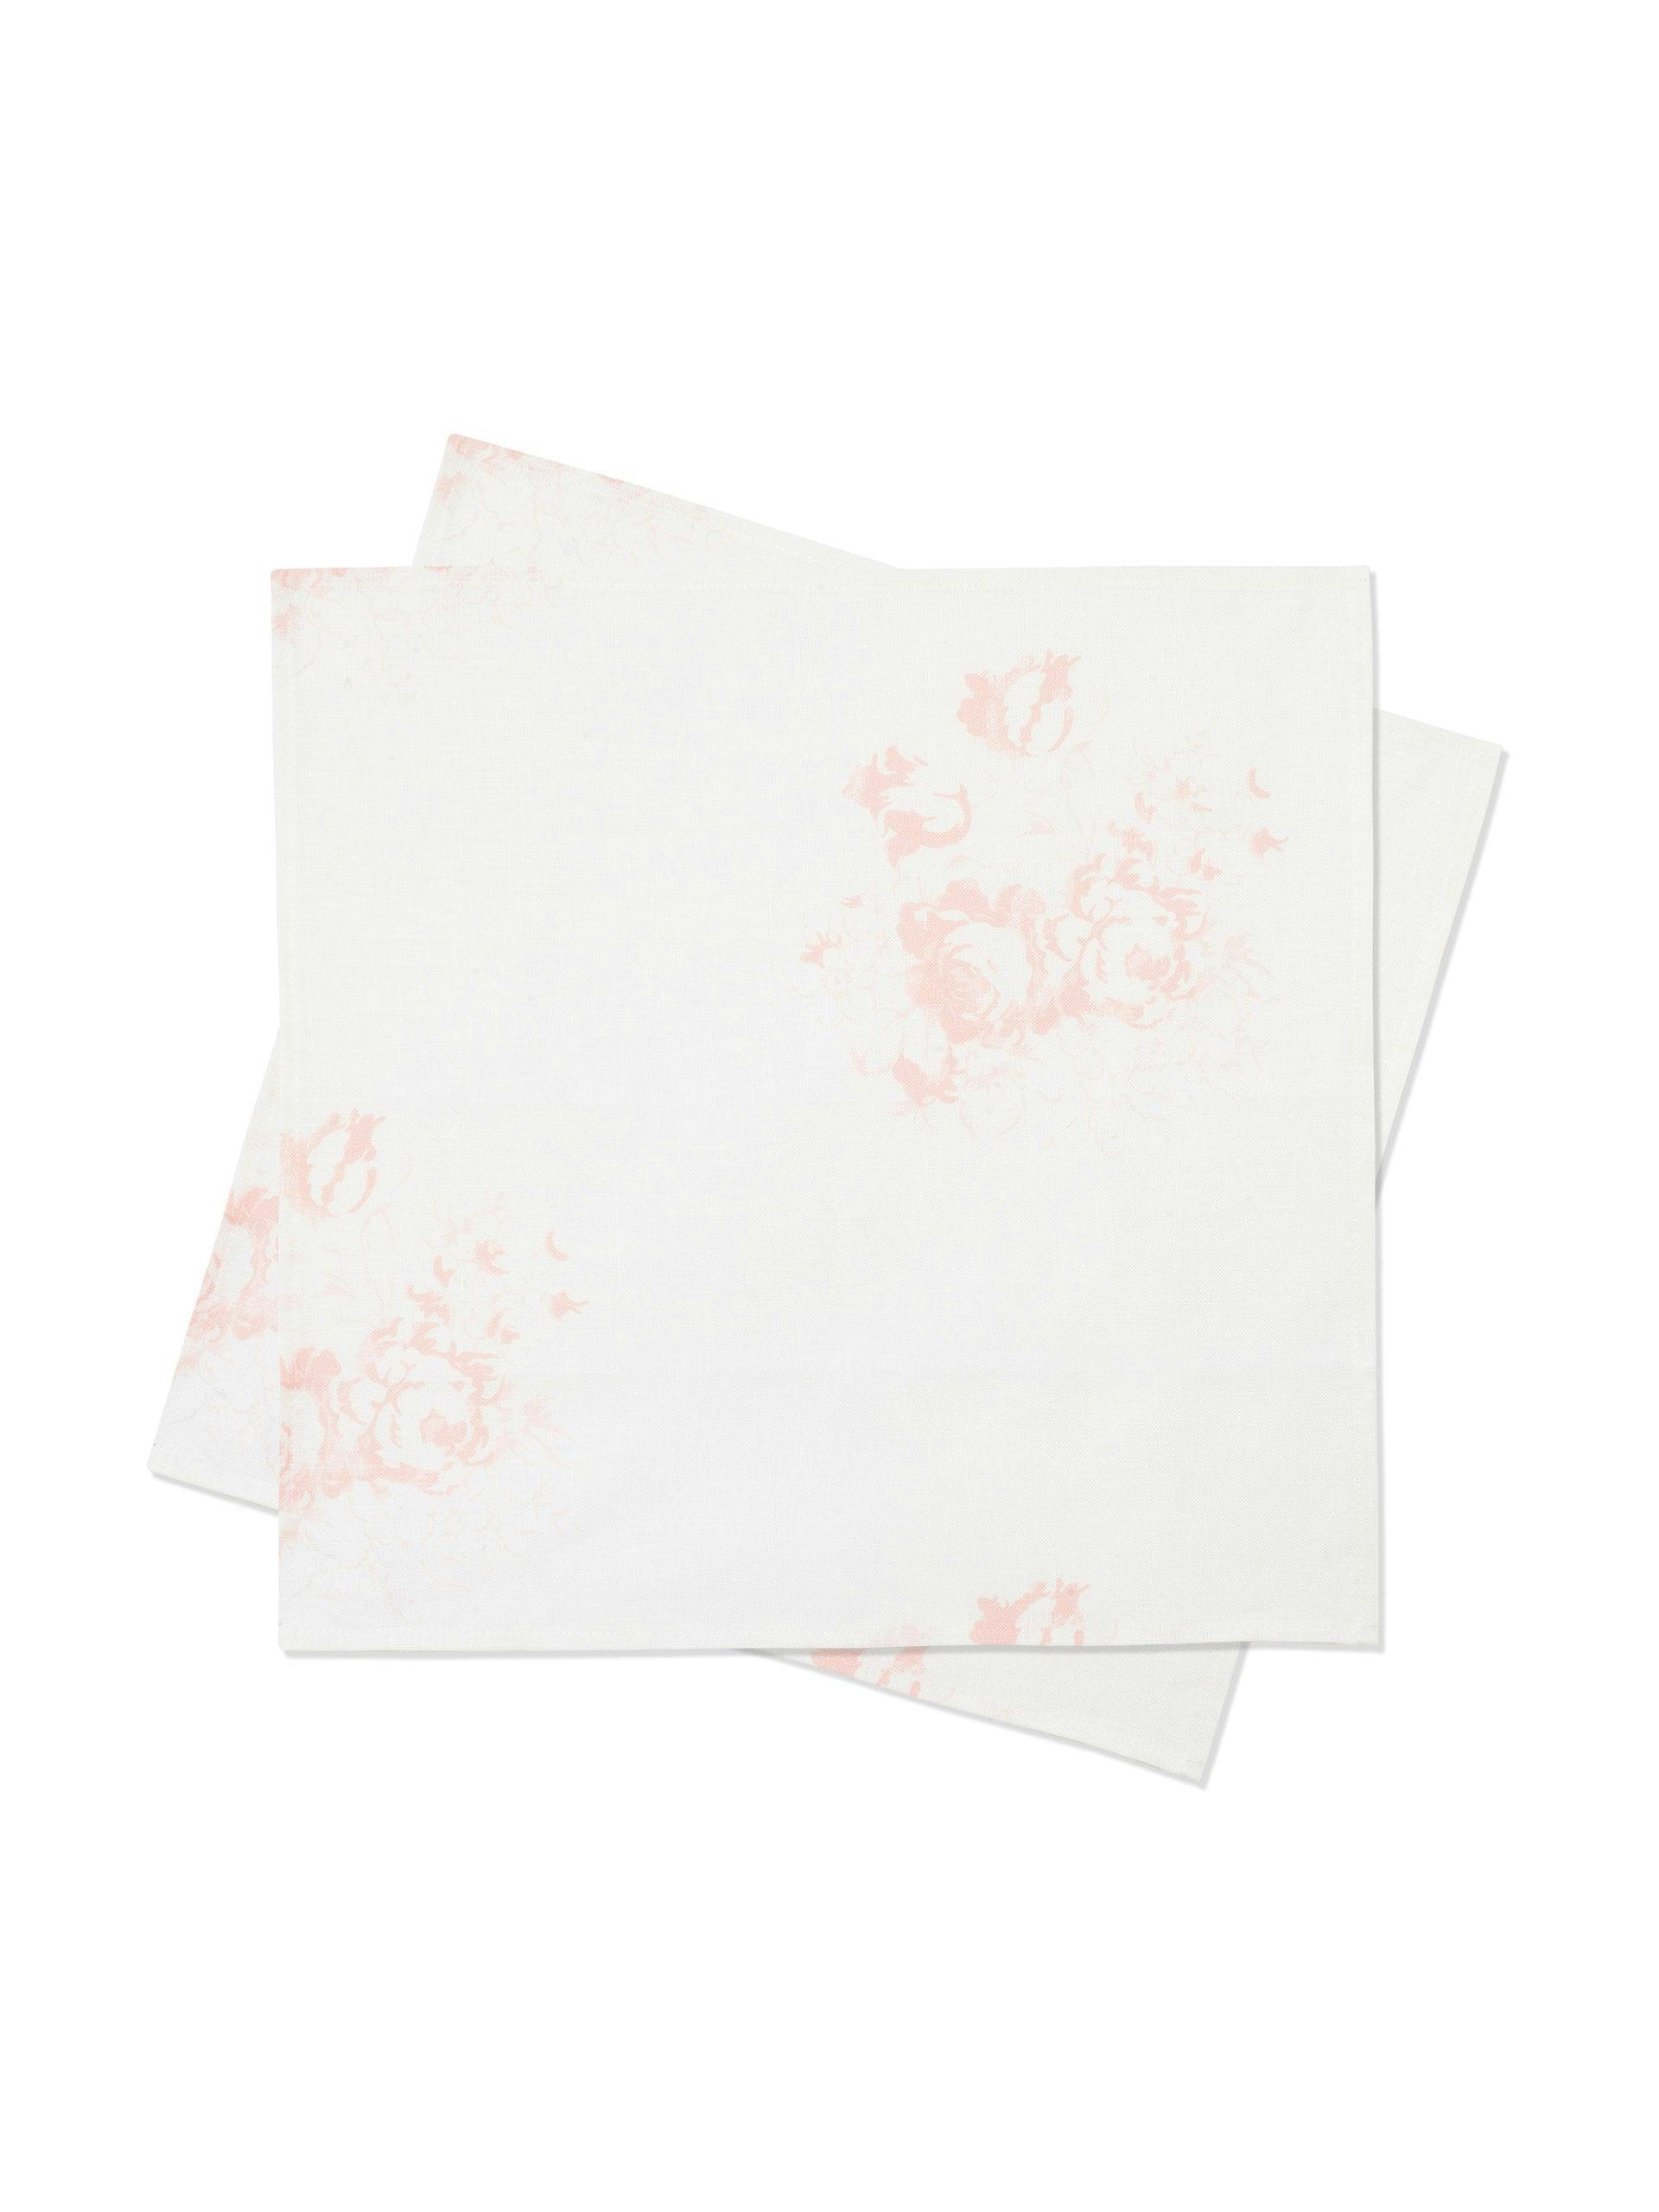 Napkin pair in hatley pink on white linen